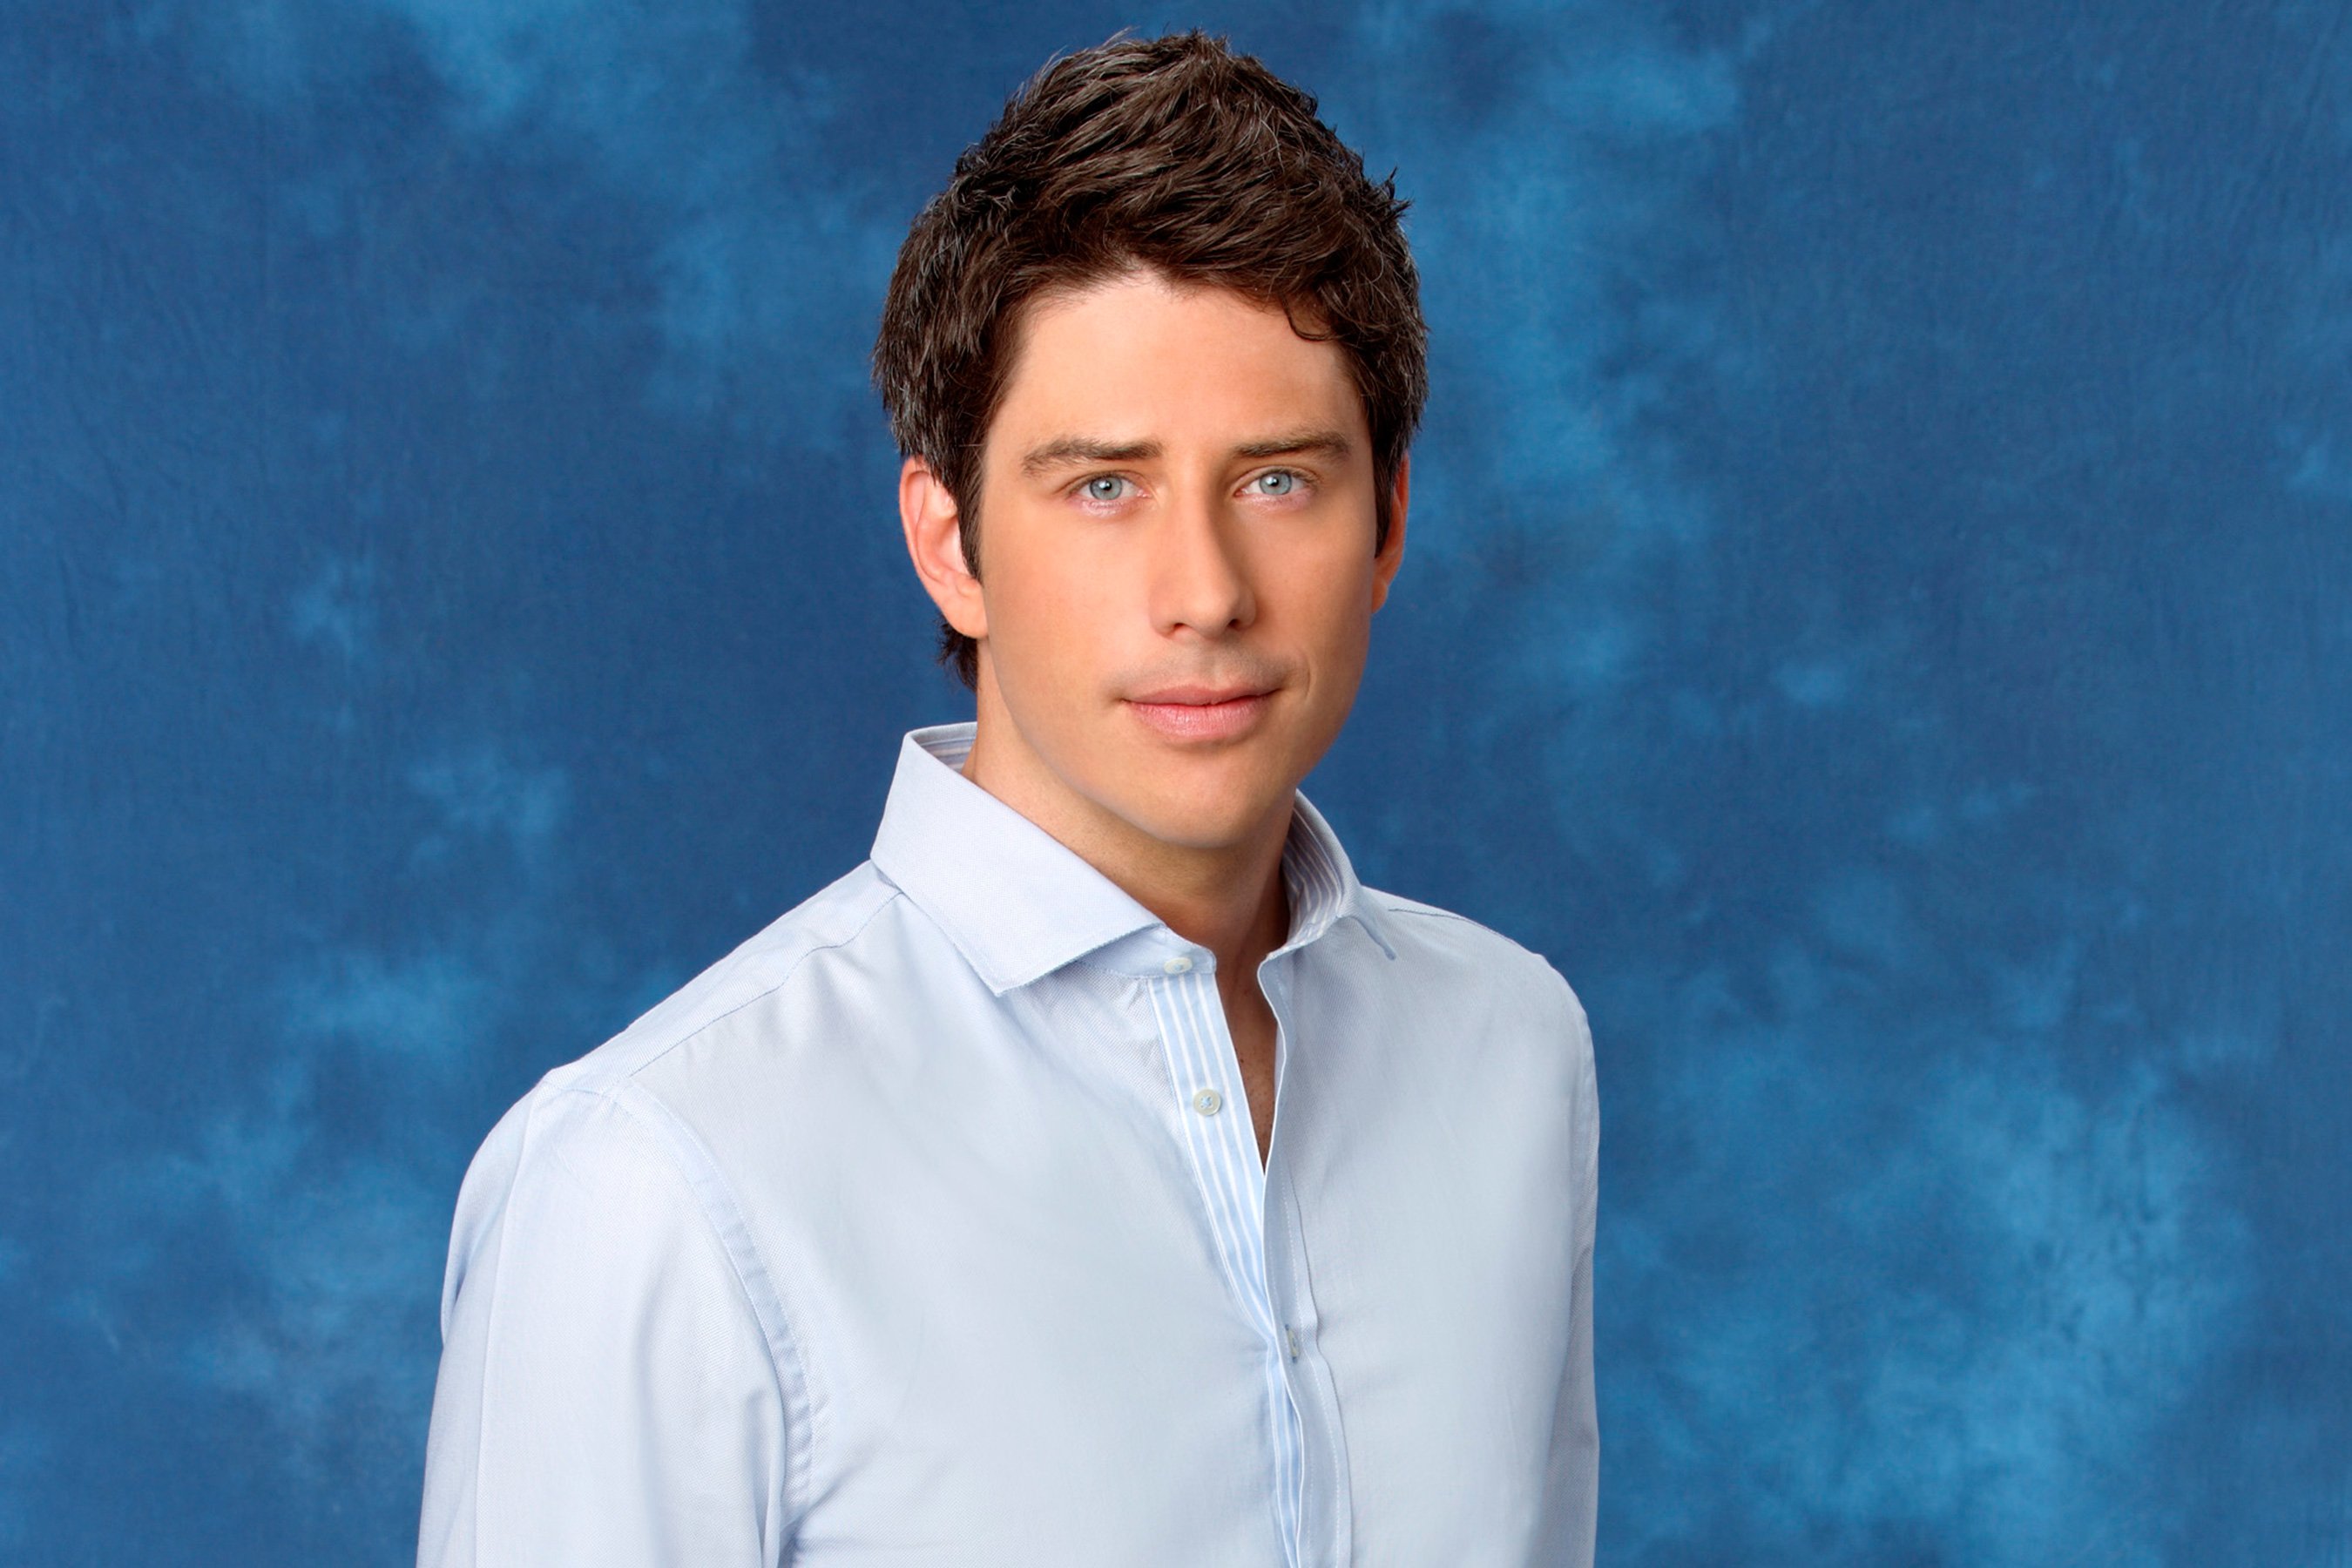 Arie Luyendyk Jr. poses against a blue background